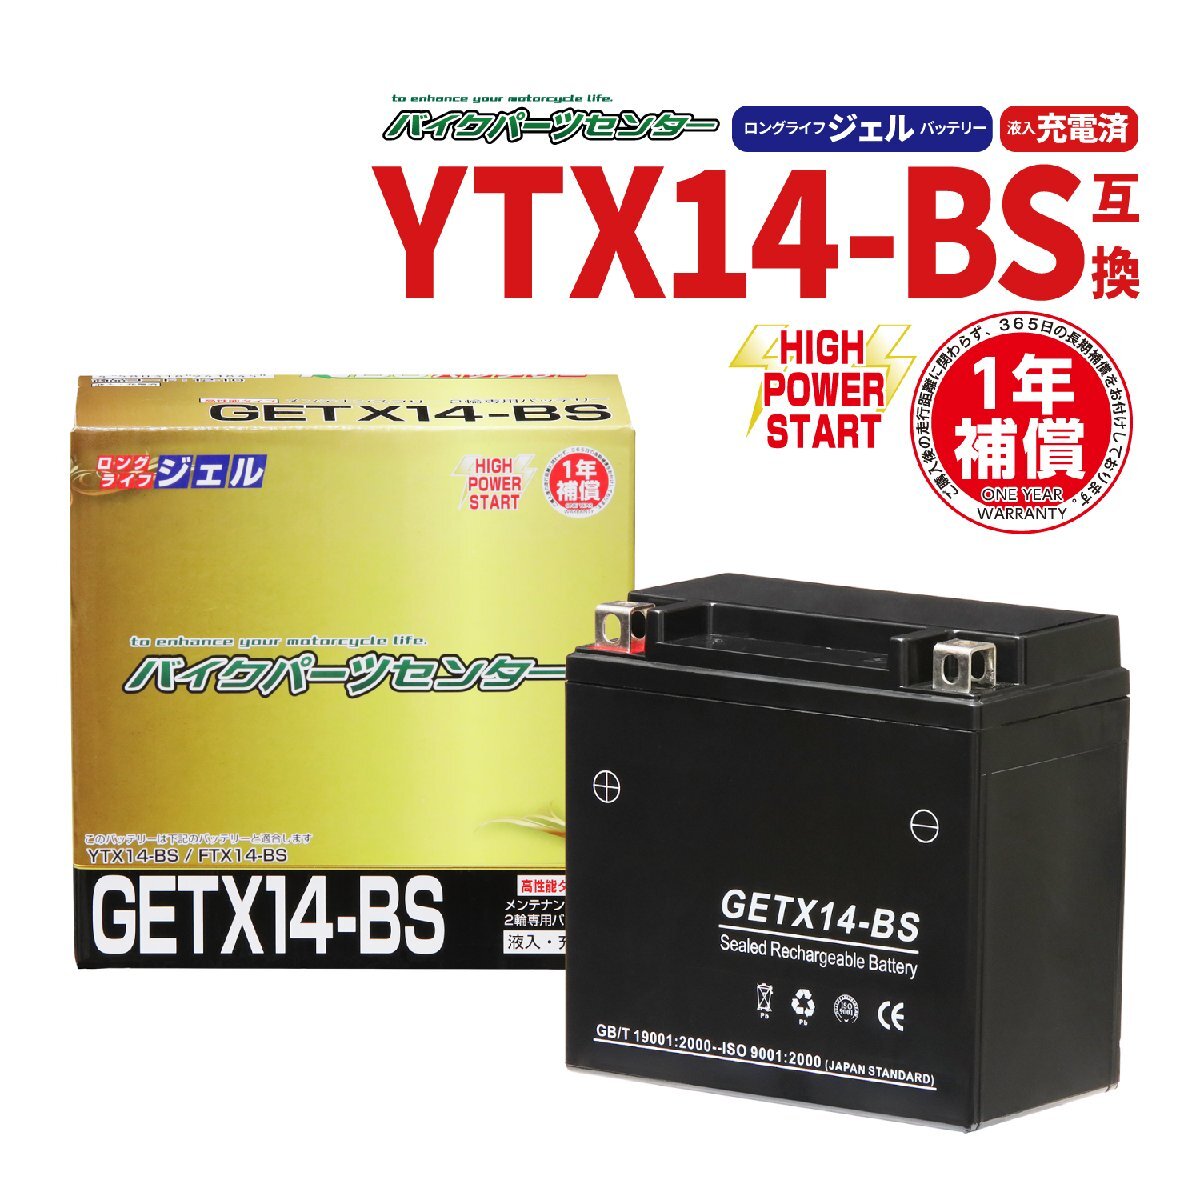 YTX14-BS互換 GETX14-BS バイクバッテリー ジェル 1年保証付 新品 バイクパーツセンターの画像1